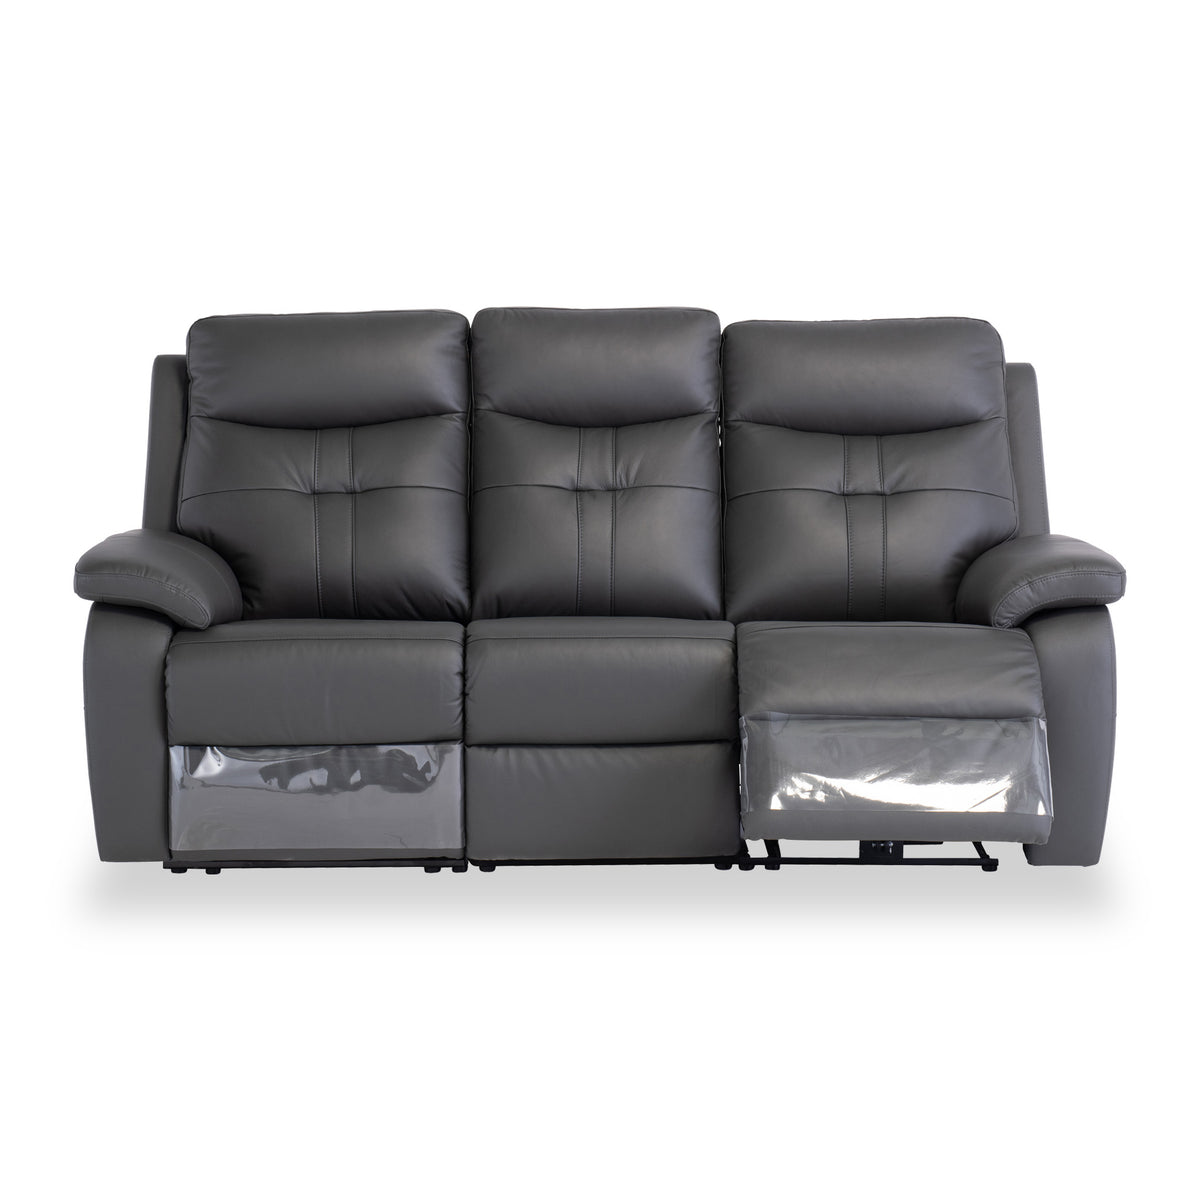 Talbot Charcoal Leather Electric Reclining 3 Seater Sofa from Roseland Furniture